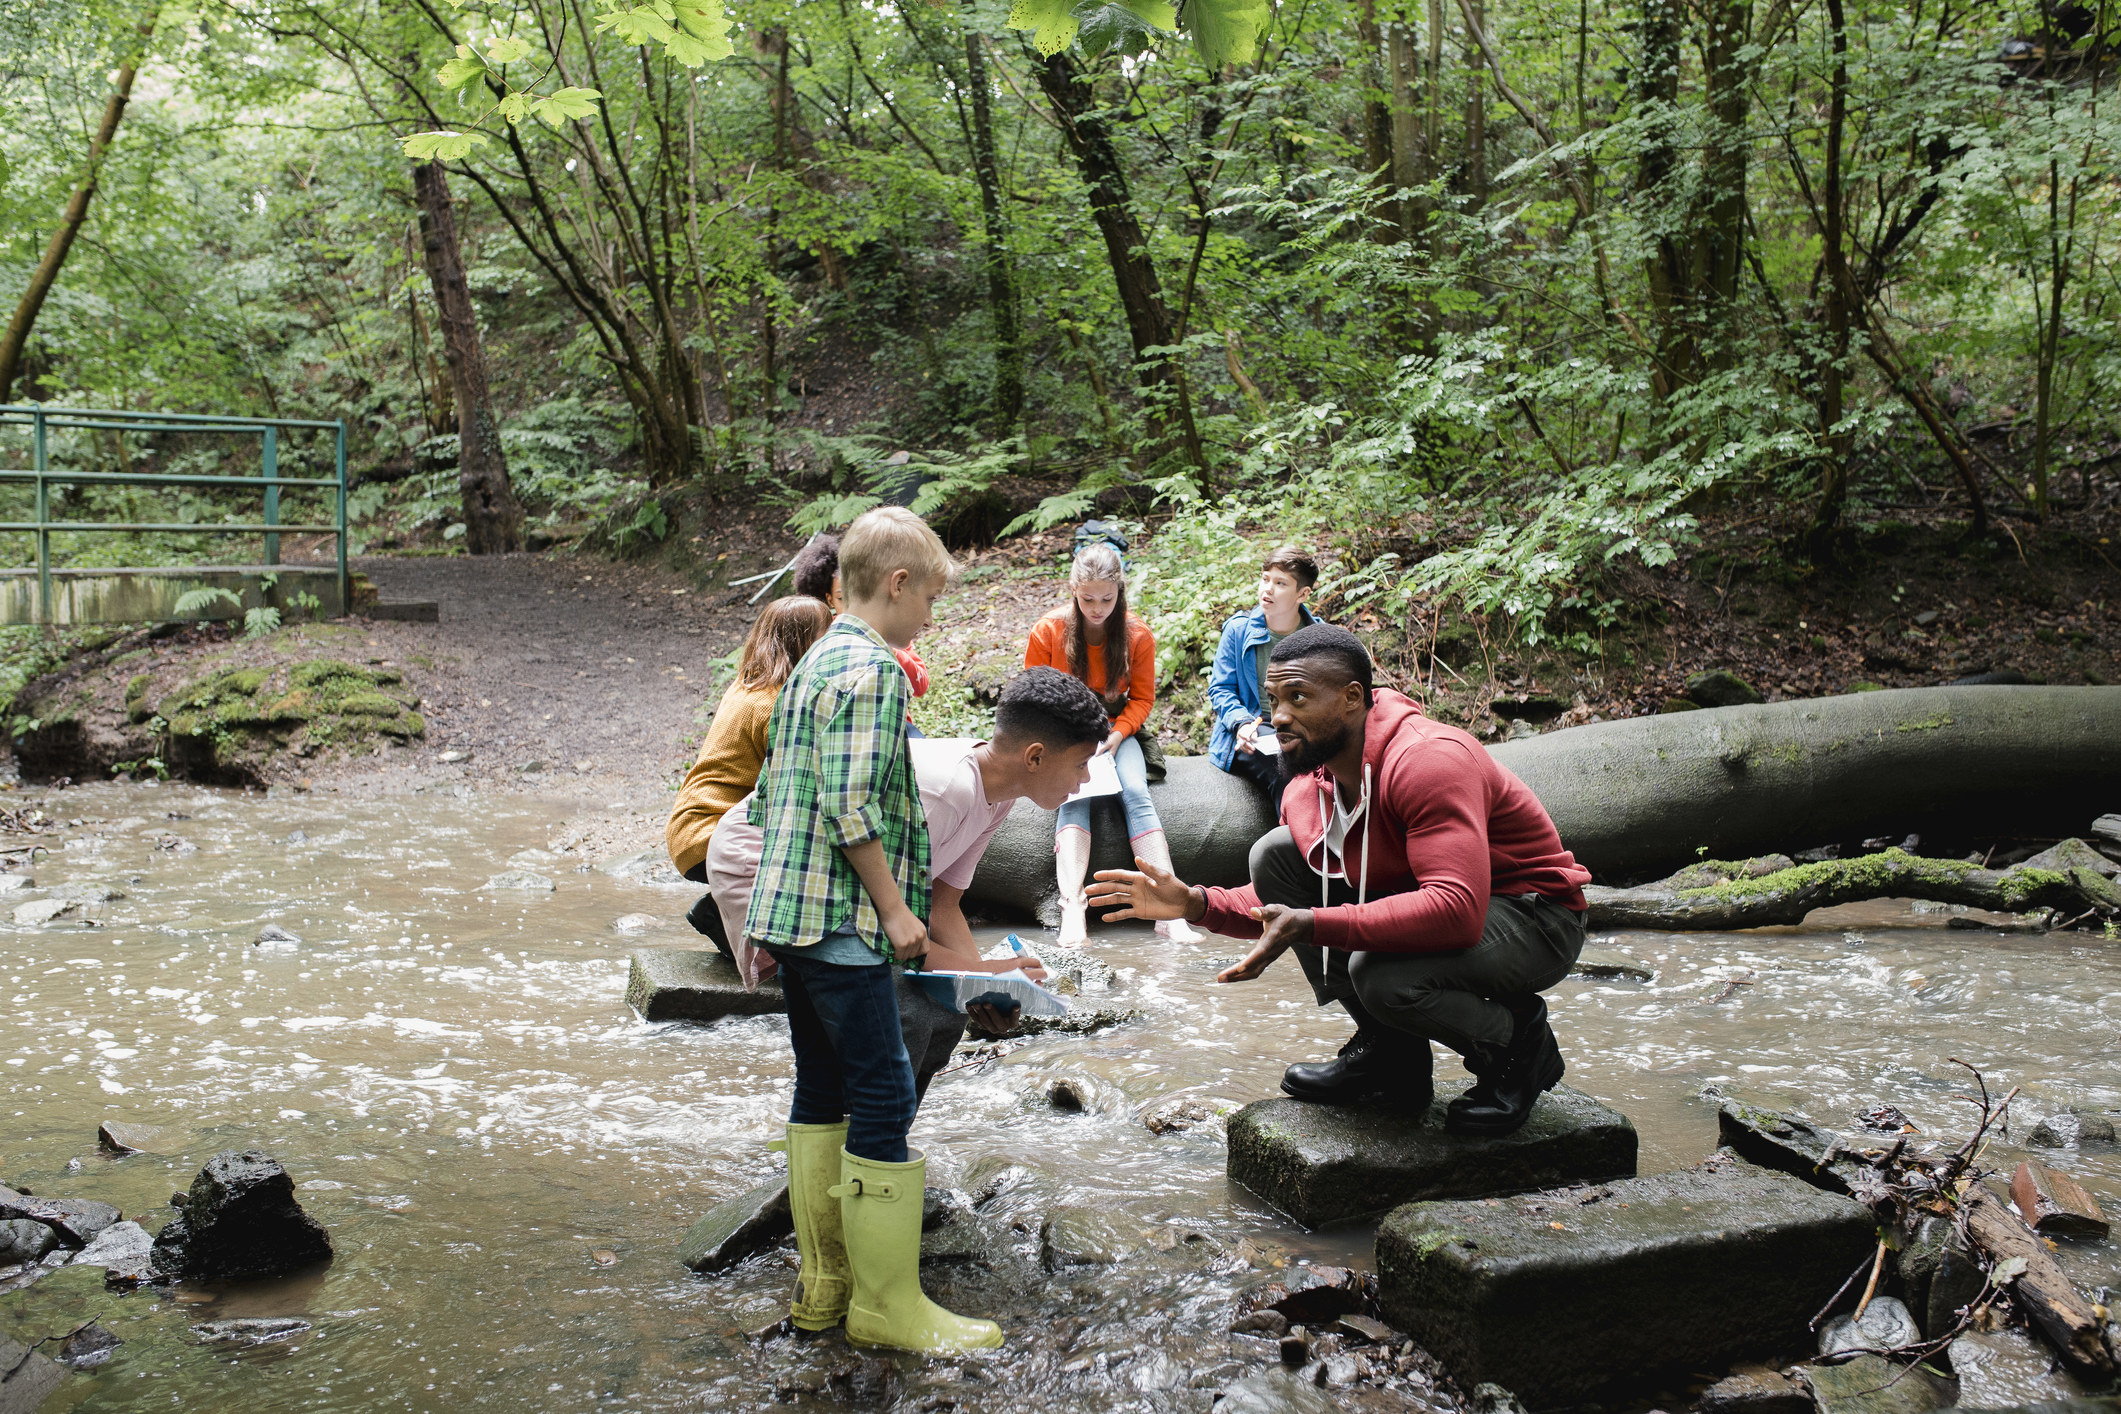 An adult teaches kinds about wildlife in a creek